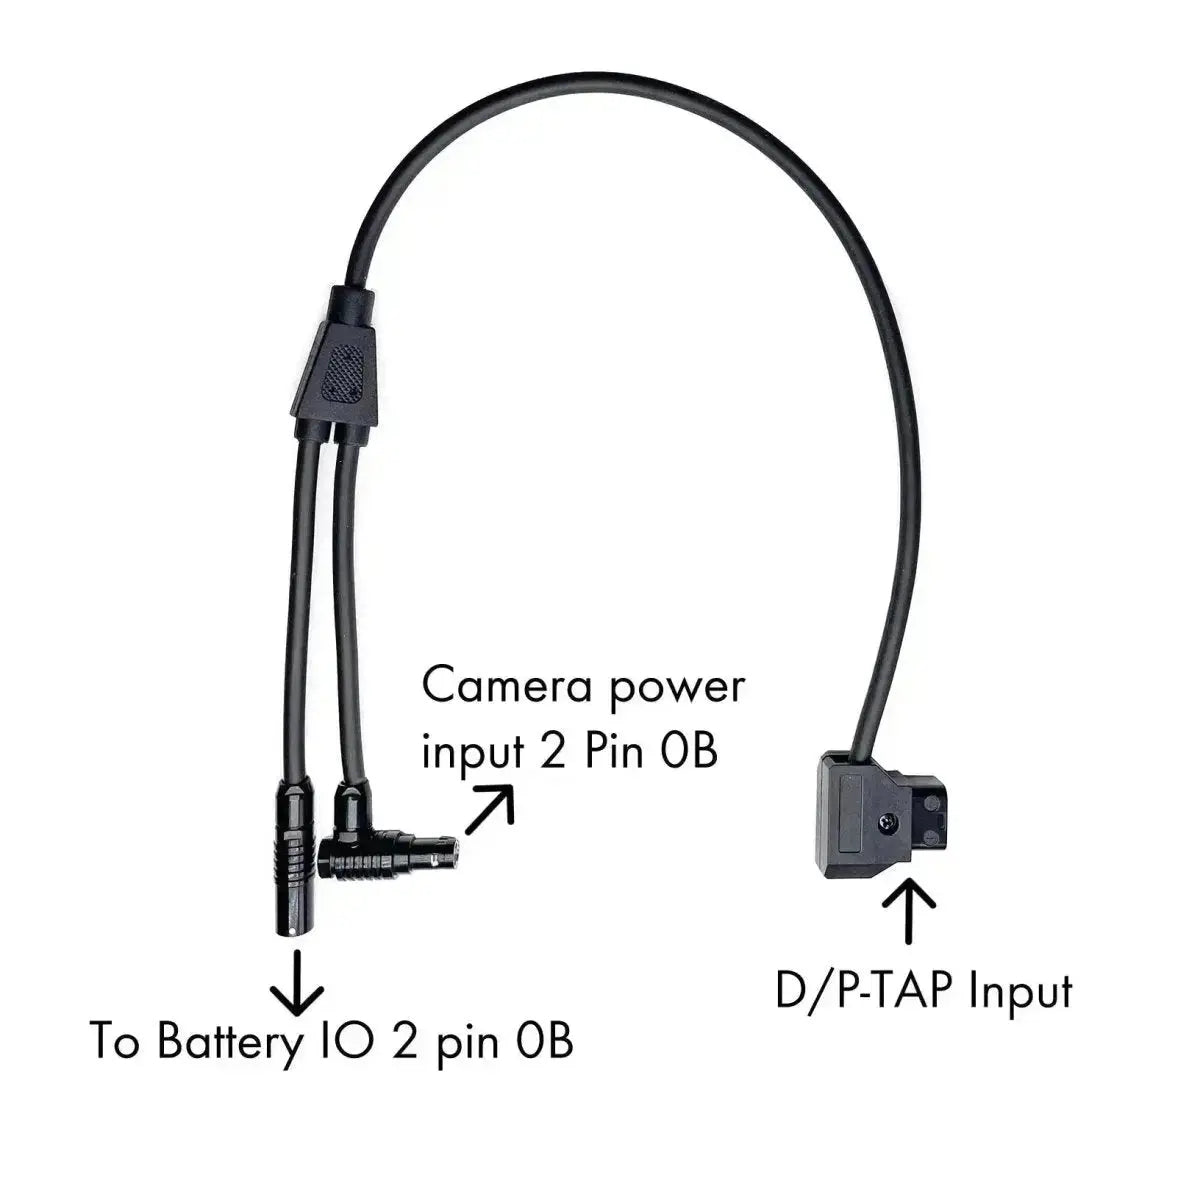 Battery IO DC Input Cable for Battery IO (for V1 V-Mount, Gold and MAX)